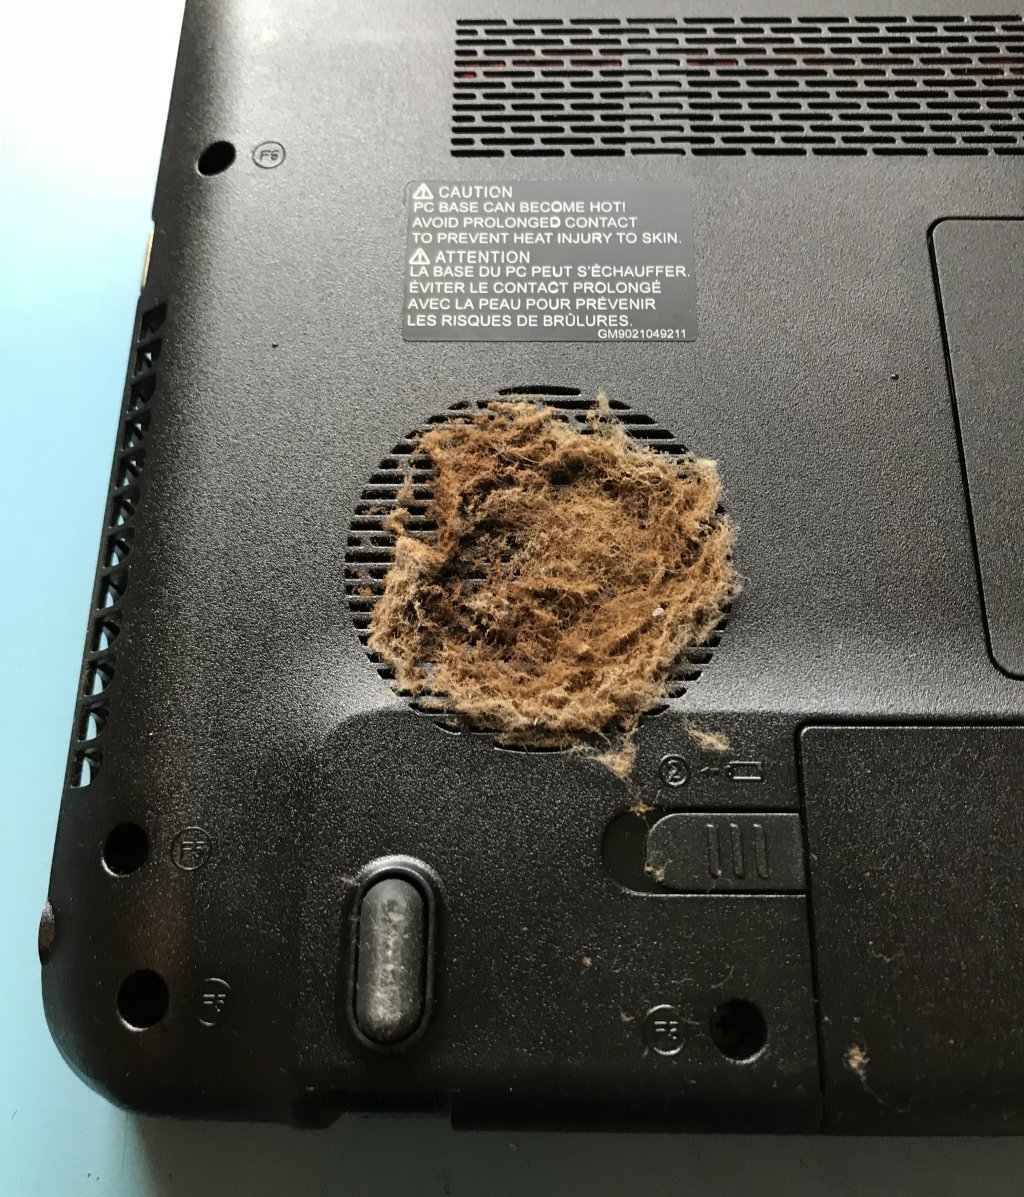 Laptop fan clogged up